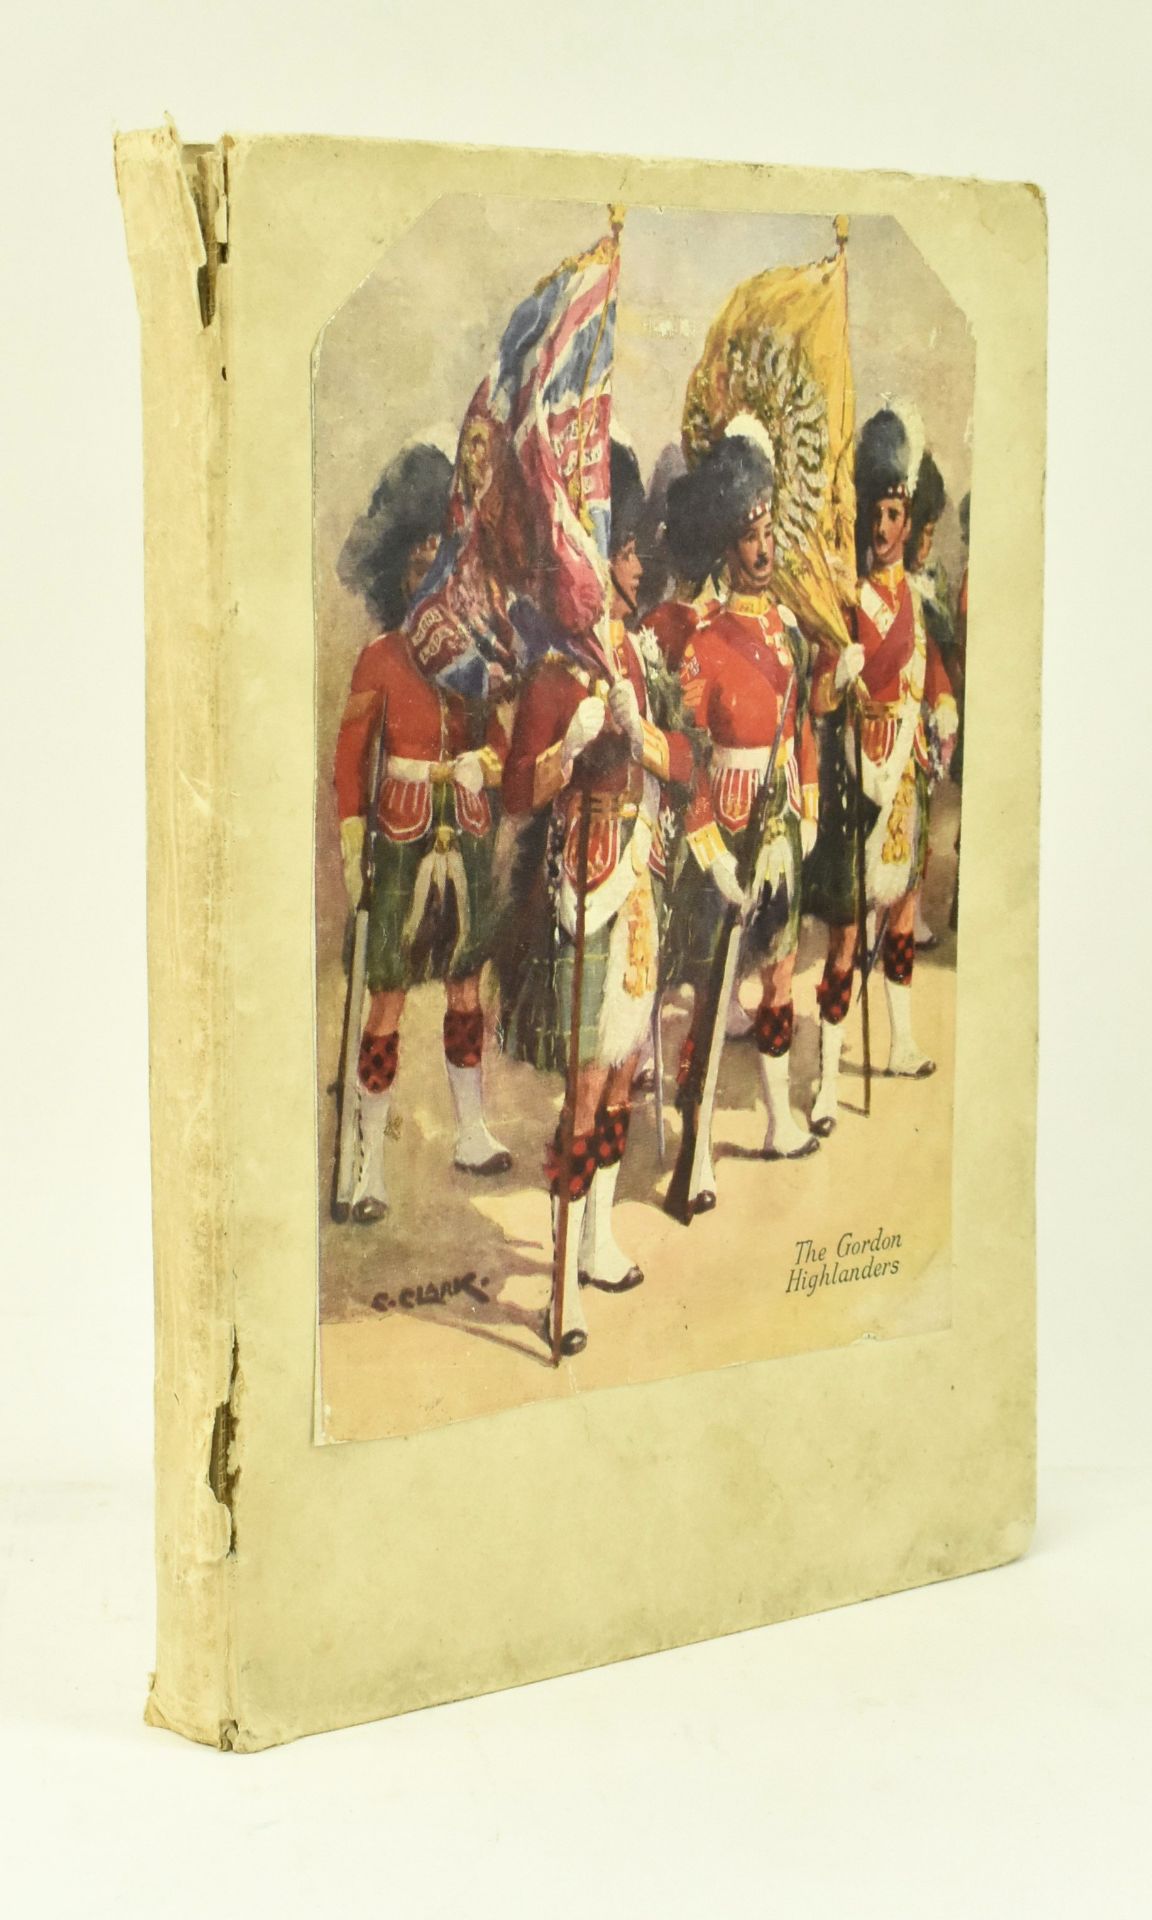 EARLY 20TH CENTURY FIRST WORLD WAR MILITARY SCRAPBOOK